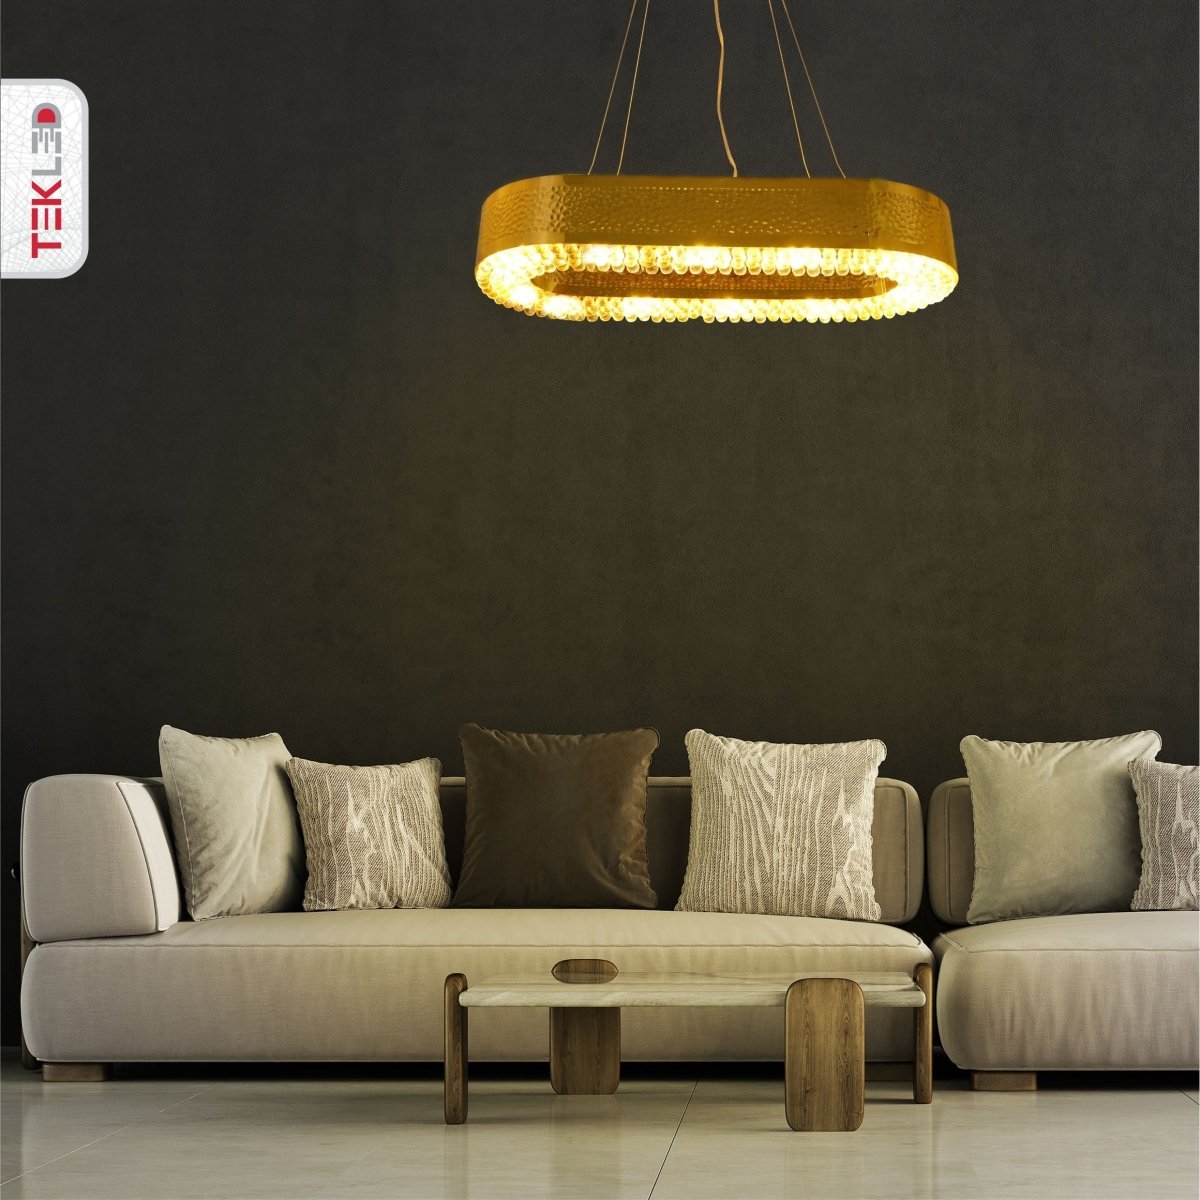 More interior usage of Ball Crystal Gold Metal Island Chandelier L850 with 10XE14 Fitting | TEKLED 156-19566